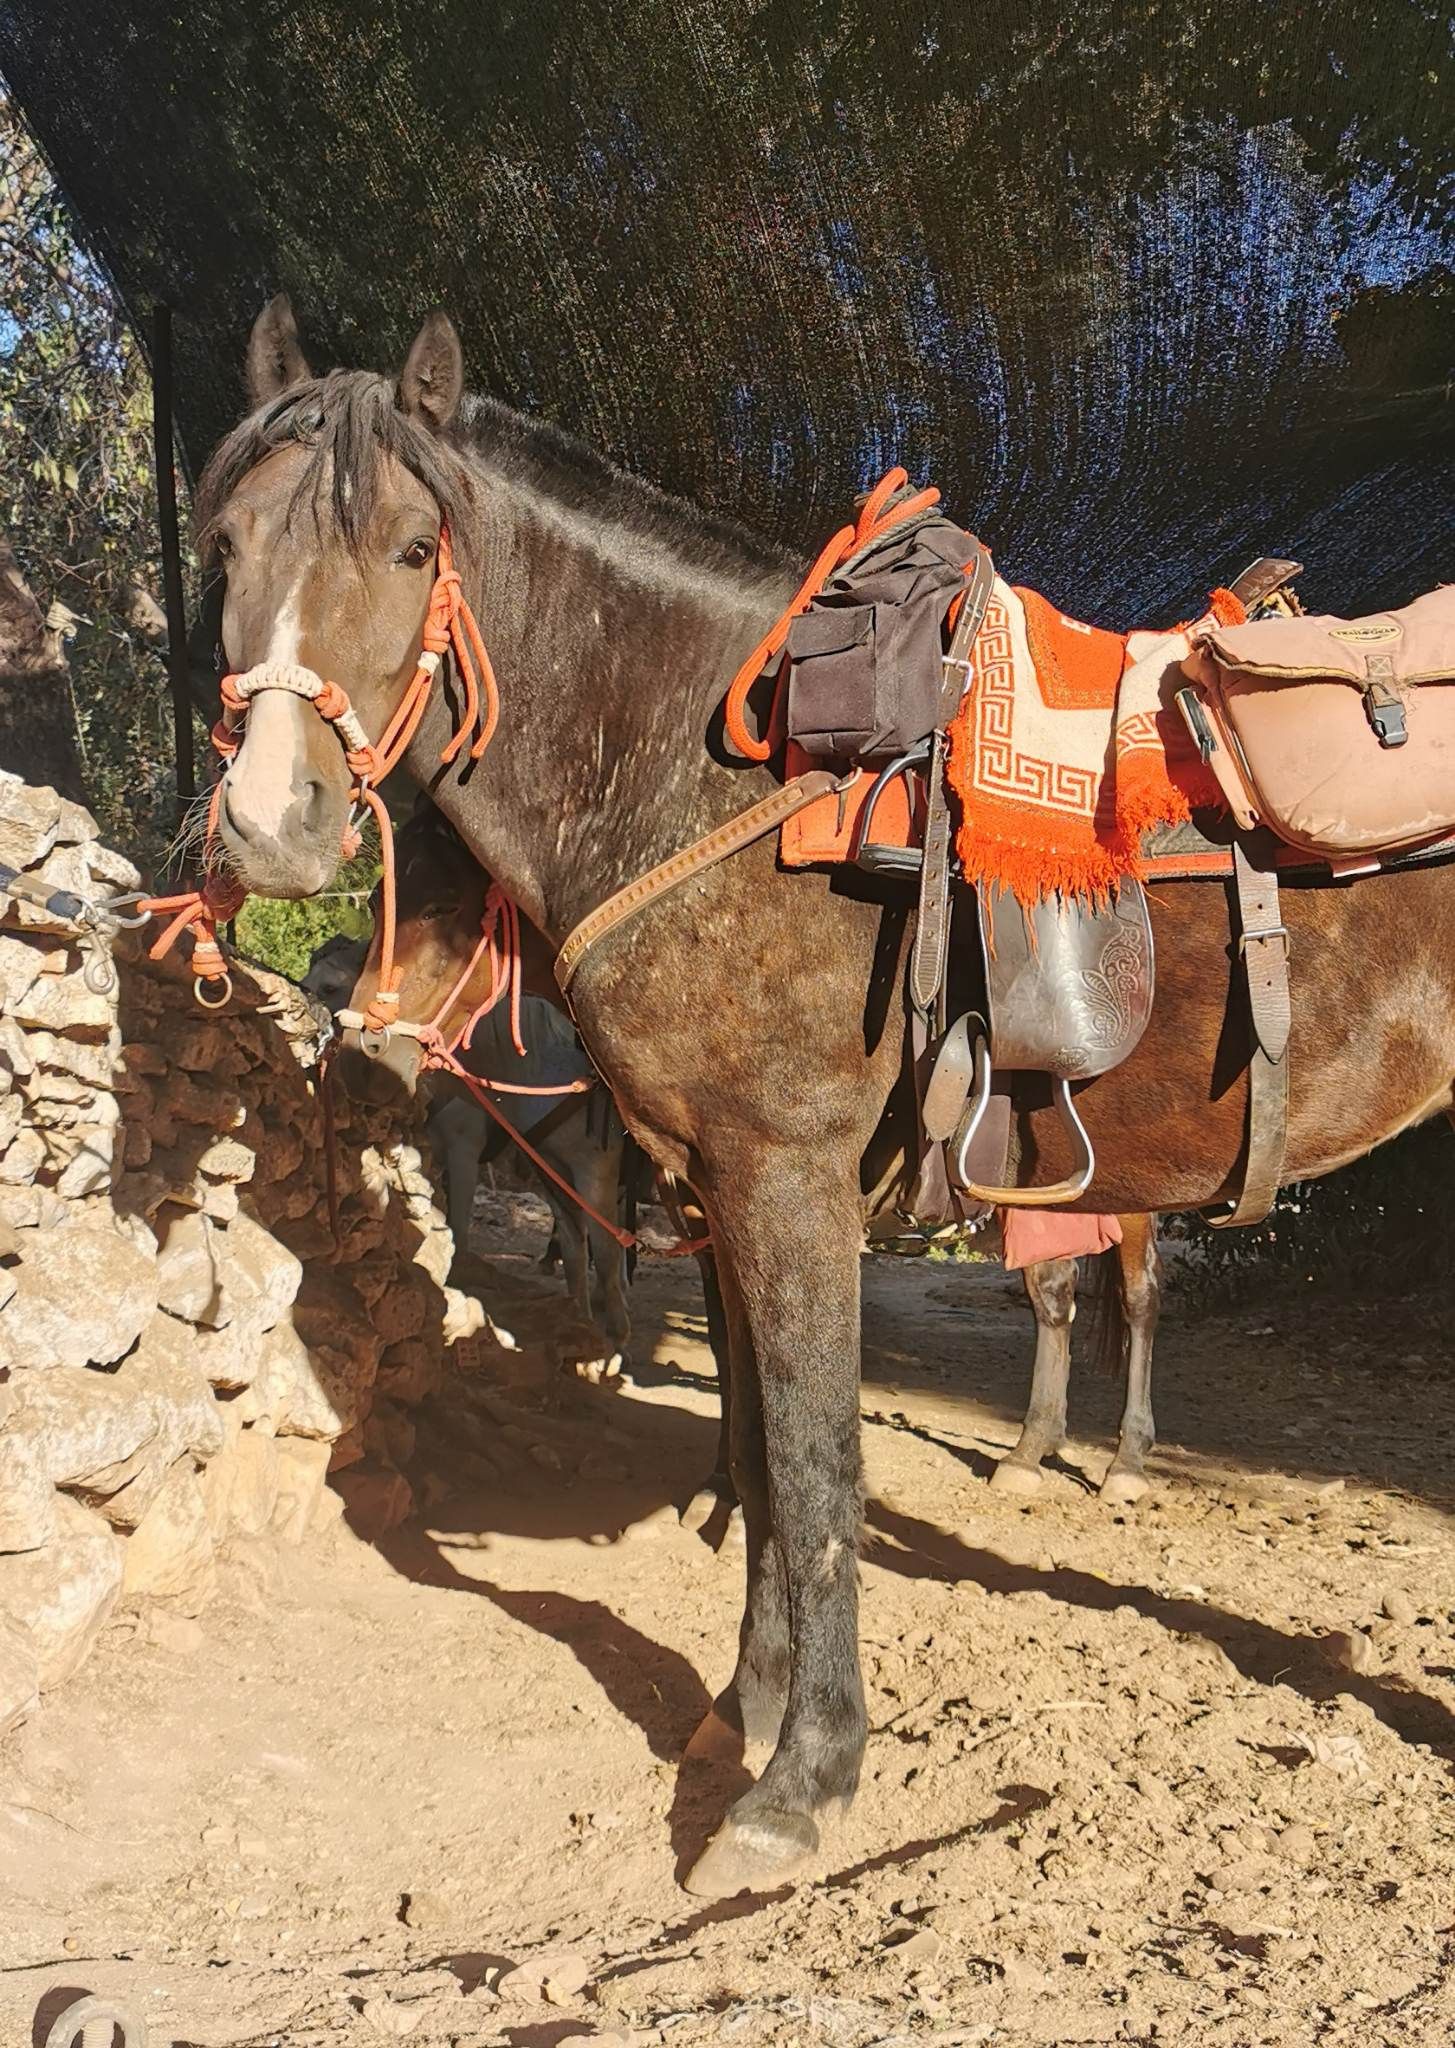 Aphrodite and Aris two of the trekking horses you will meet with Harriet's Hydra Horses on Hydra Island Greece.